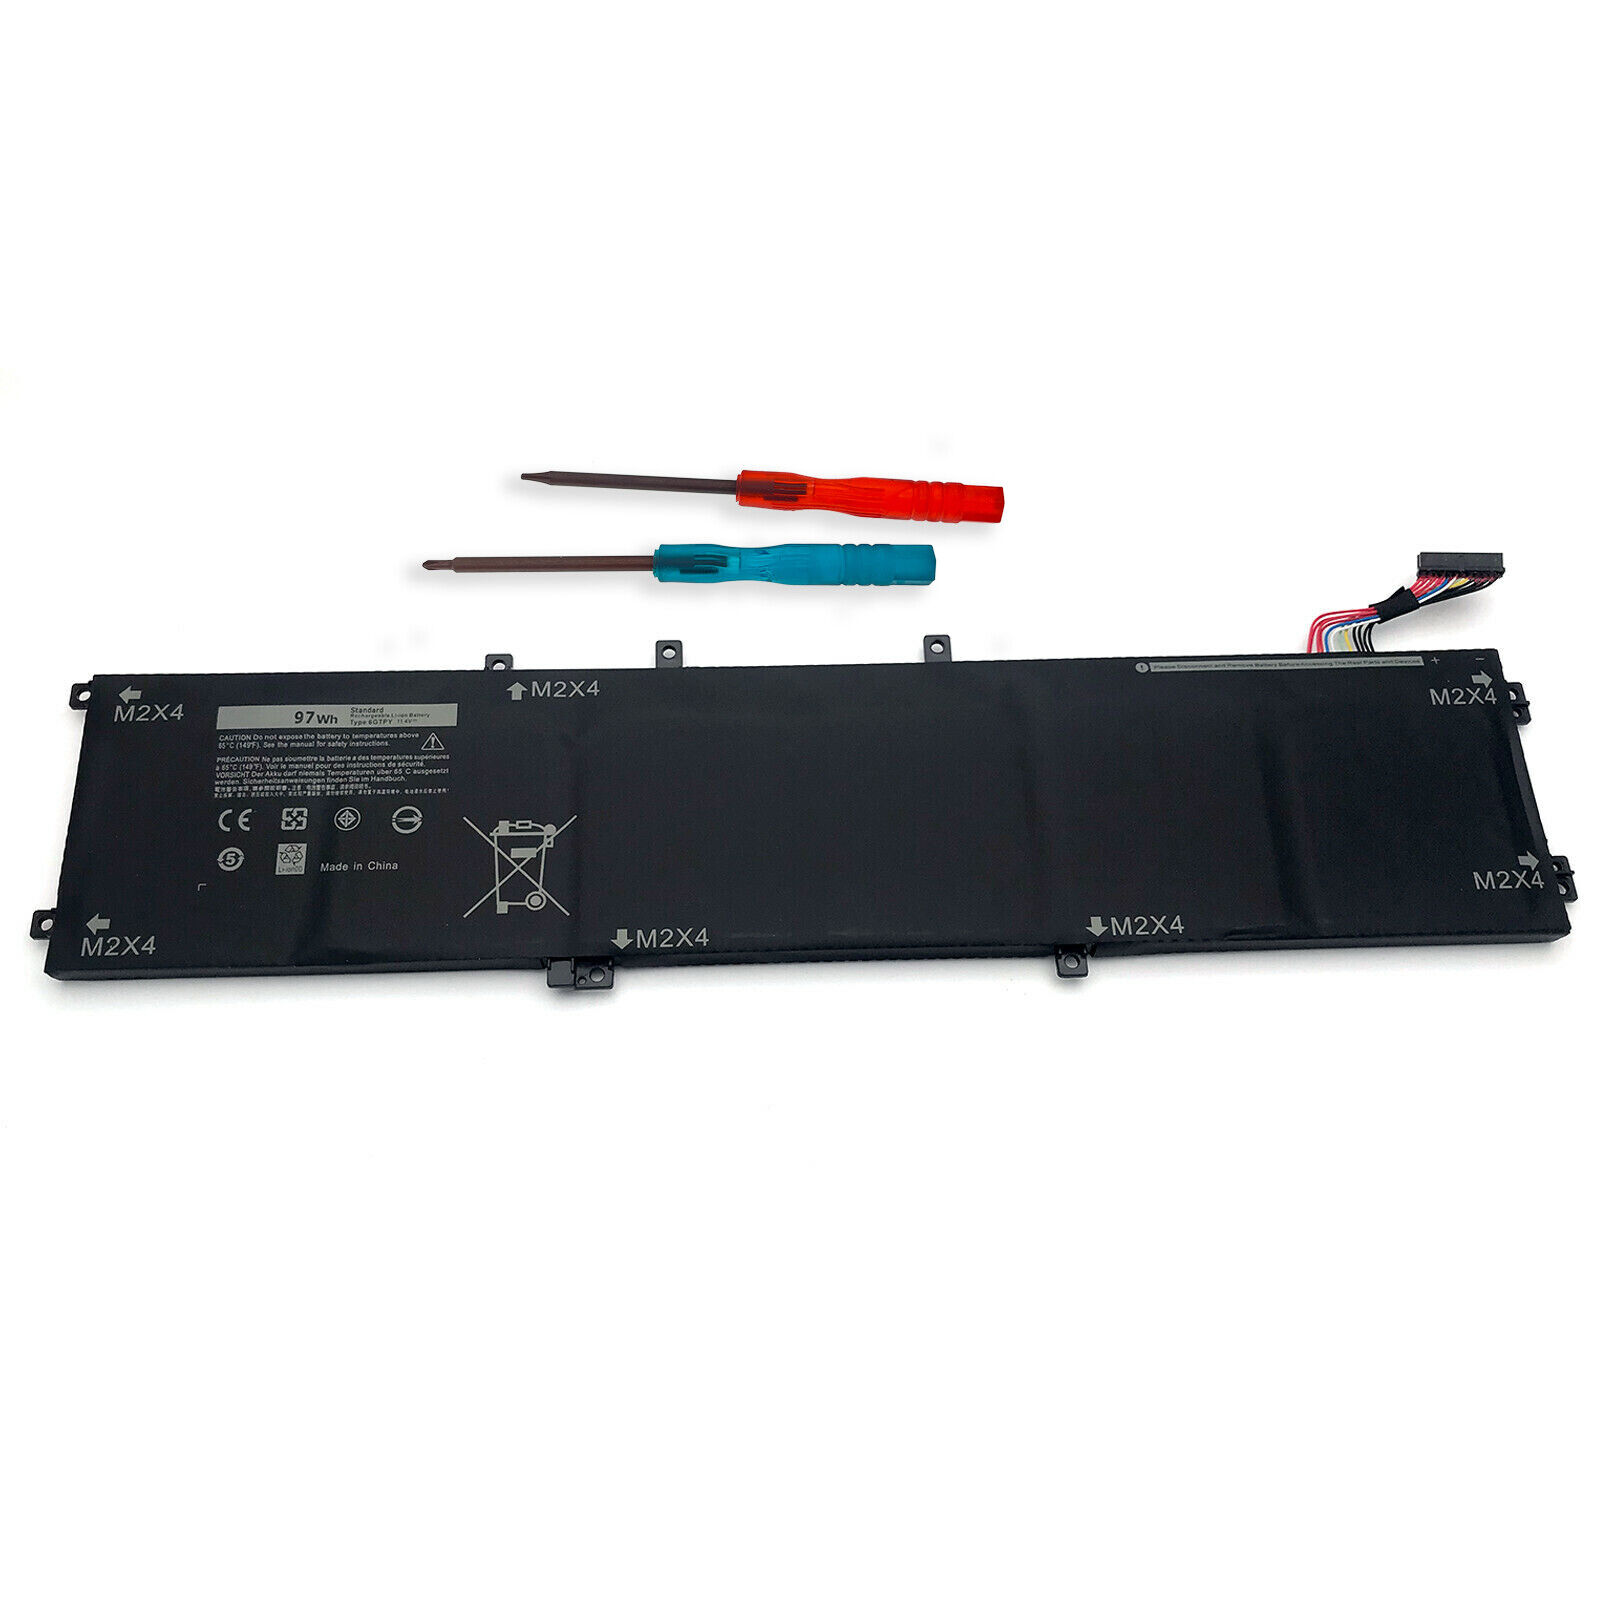 6-Cell 97Wh Extended Battery for Dell Precision 5520 5530 Laptop 06GTPY 5XJ28